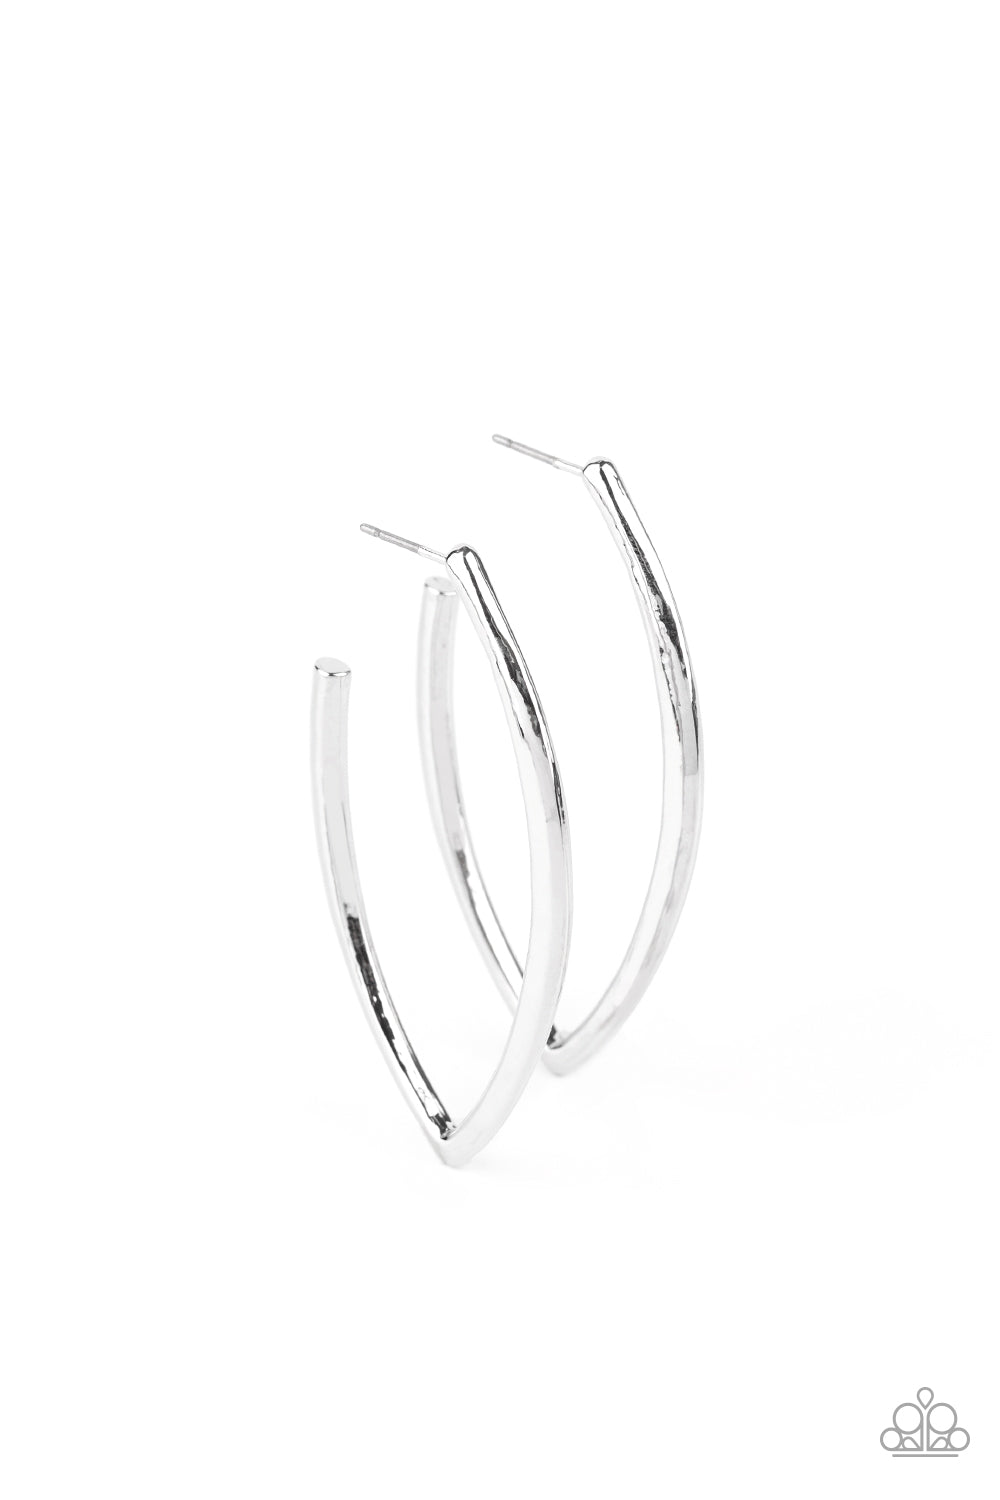 Point-Blank Beautiful Silver Hoop Earring - Paparazzi Accessories  A glistening silver bar sharply curves into an abstract hoop for an edgy finish. Earring attaches to a standard post fitting. Hoop measures approximately 1" in diameter.  ﻿All Paparazzi Accessories are lead free and nickel free!  Sold as one pair of hoop earrings.